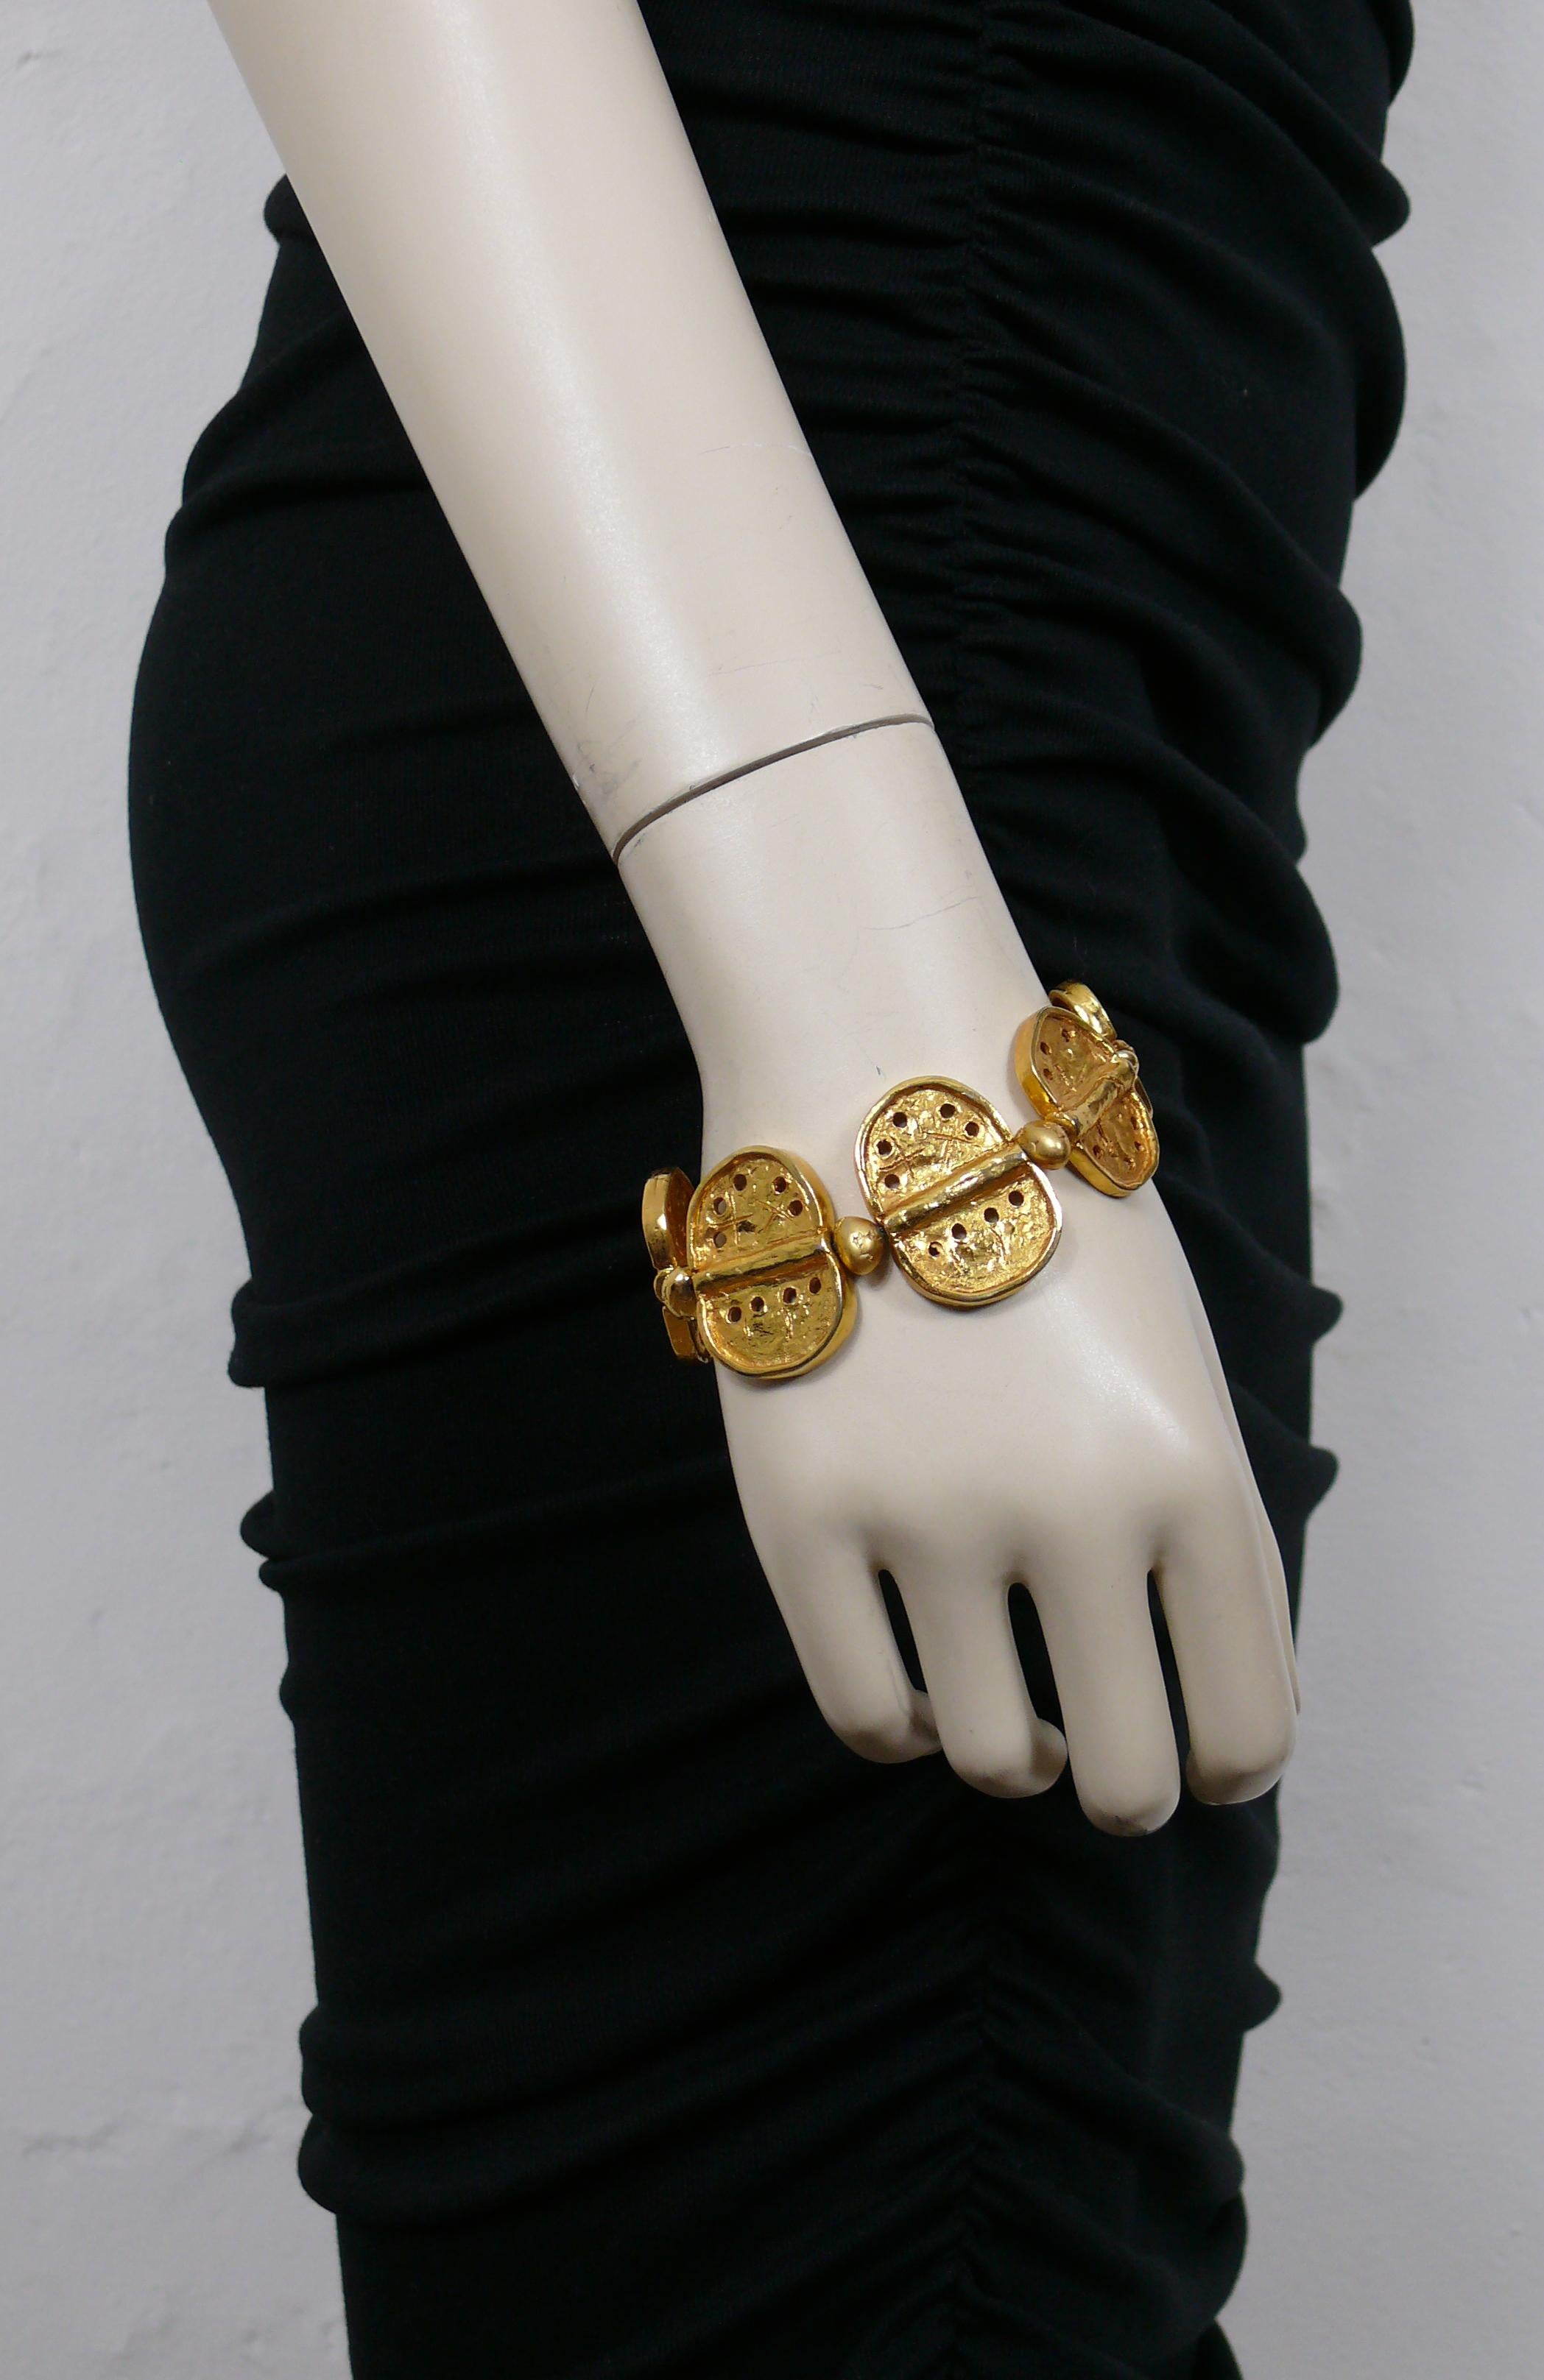 CHRISTIAN LACROIX vintage gold toned bracelet featuring graduated textured oval links embossed with graffitis.

Marked CHRISTIAN LACROIX CL Made in France.

Indicative measurements : length approx. 20 cm (7.87 inches) / max width approx. 3.2 cm